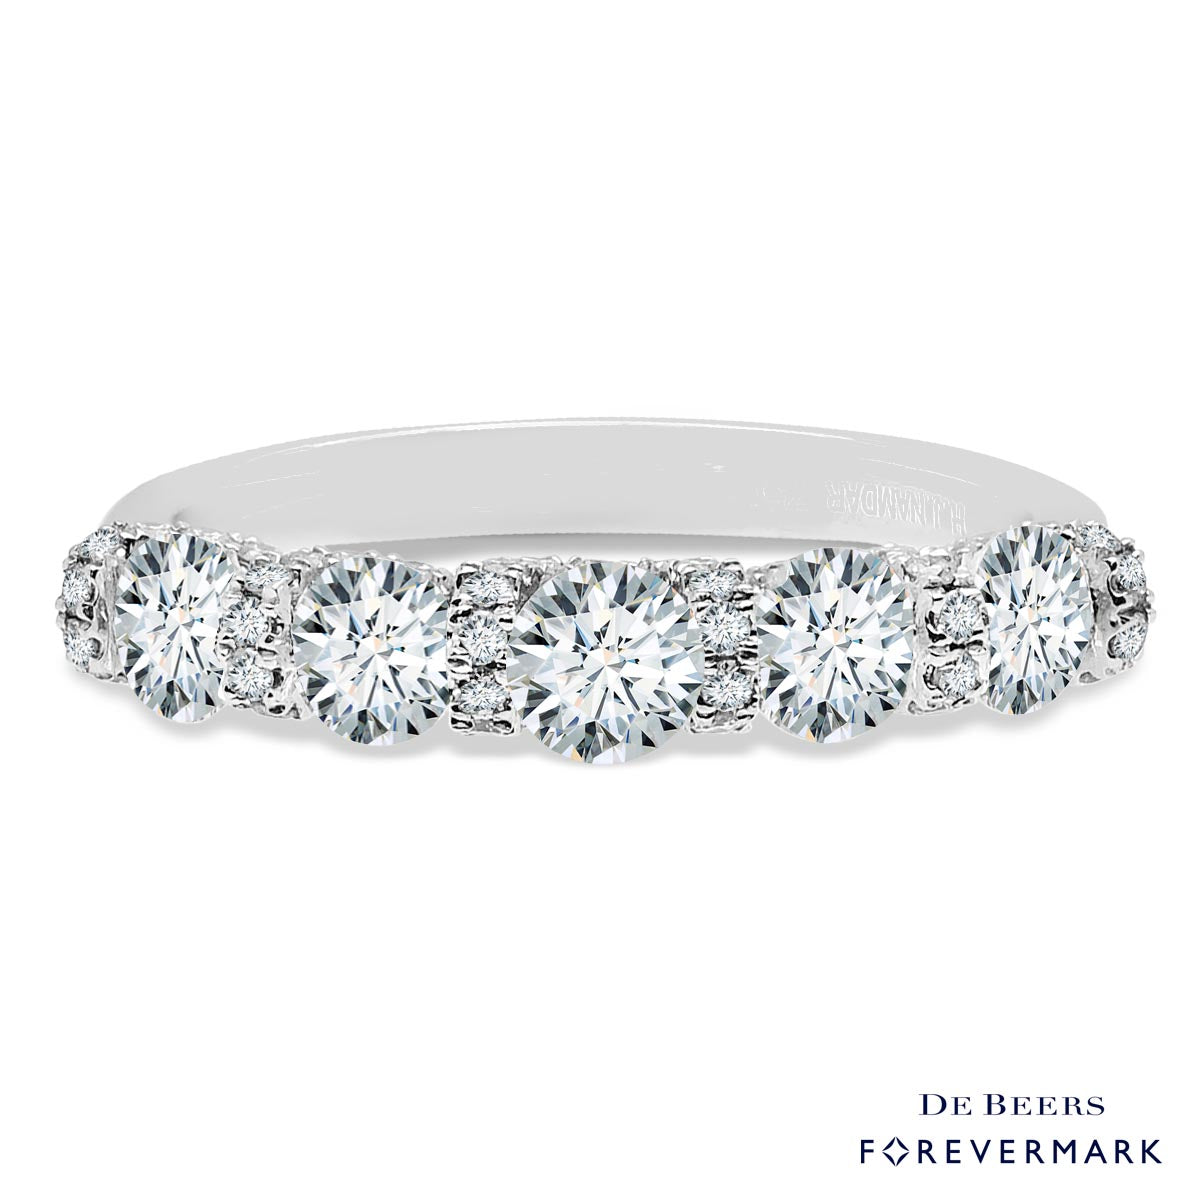 De Beers Forevermark Diamond Wedding Band in 18kt White Gold (1 1/5ct tw)